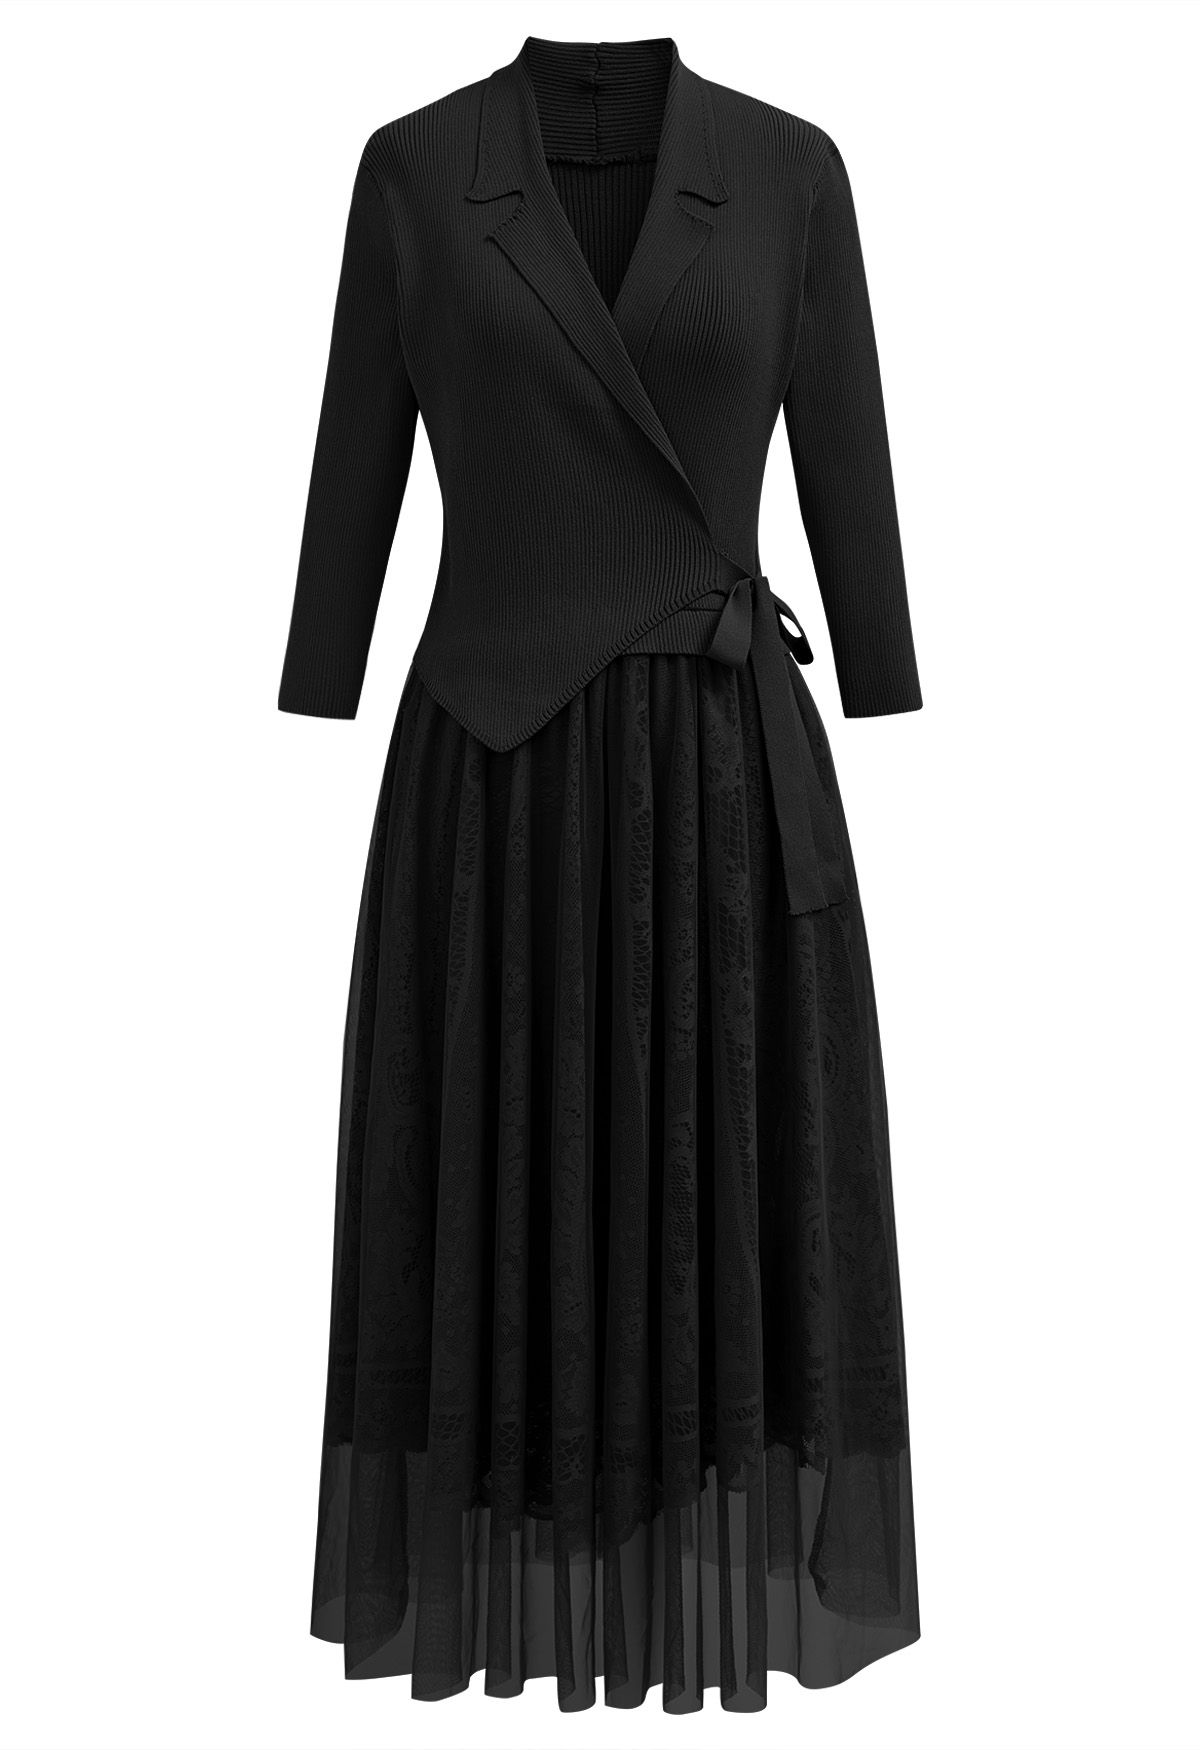 Collared V-Neck Knit Spliced Tulle Dress in Black - Retro, Indie and ...